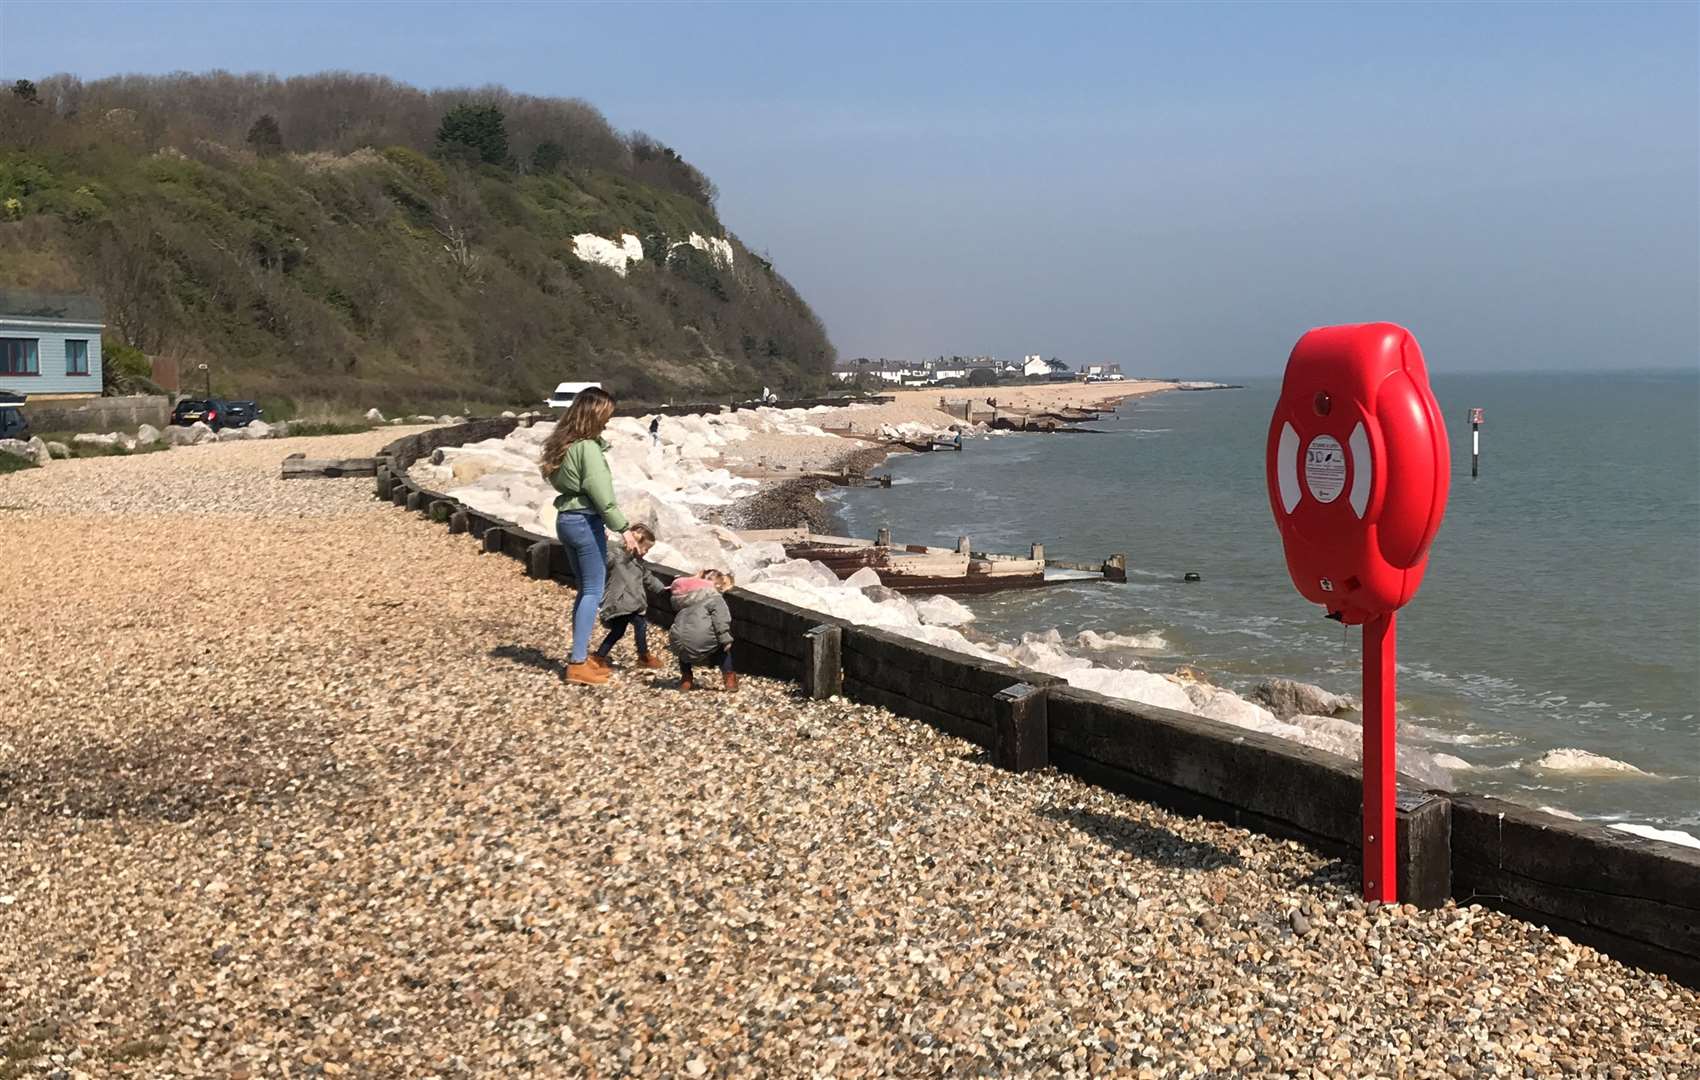 Oldstairs Bay in Kingsdown attracts families and swimmers and the lifebuoy is designed to help anyone who gets into difficulty